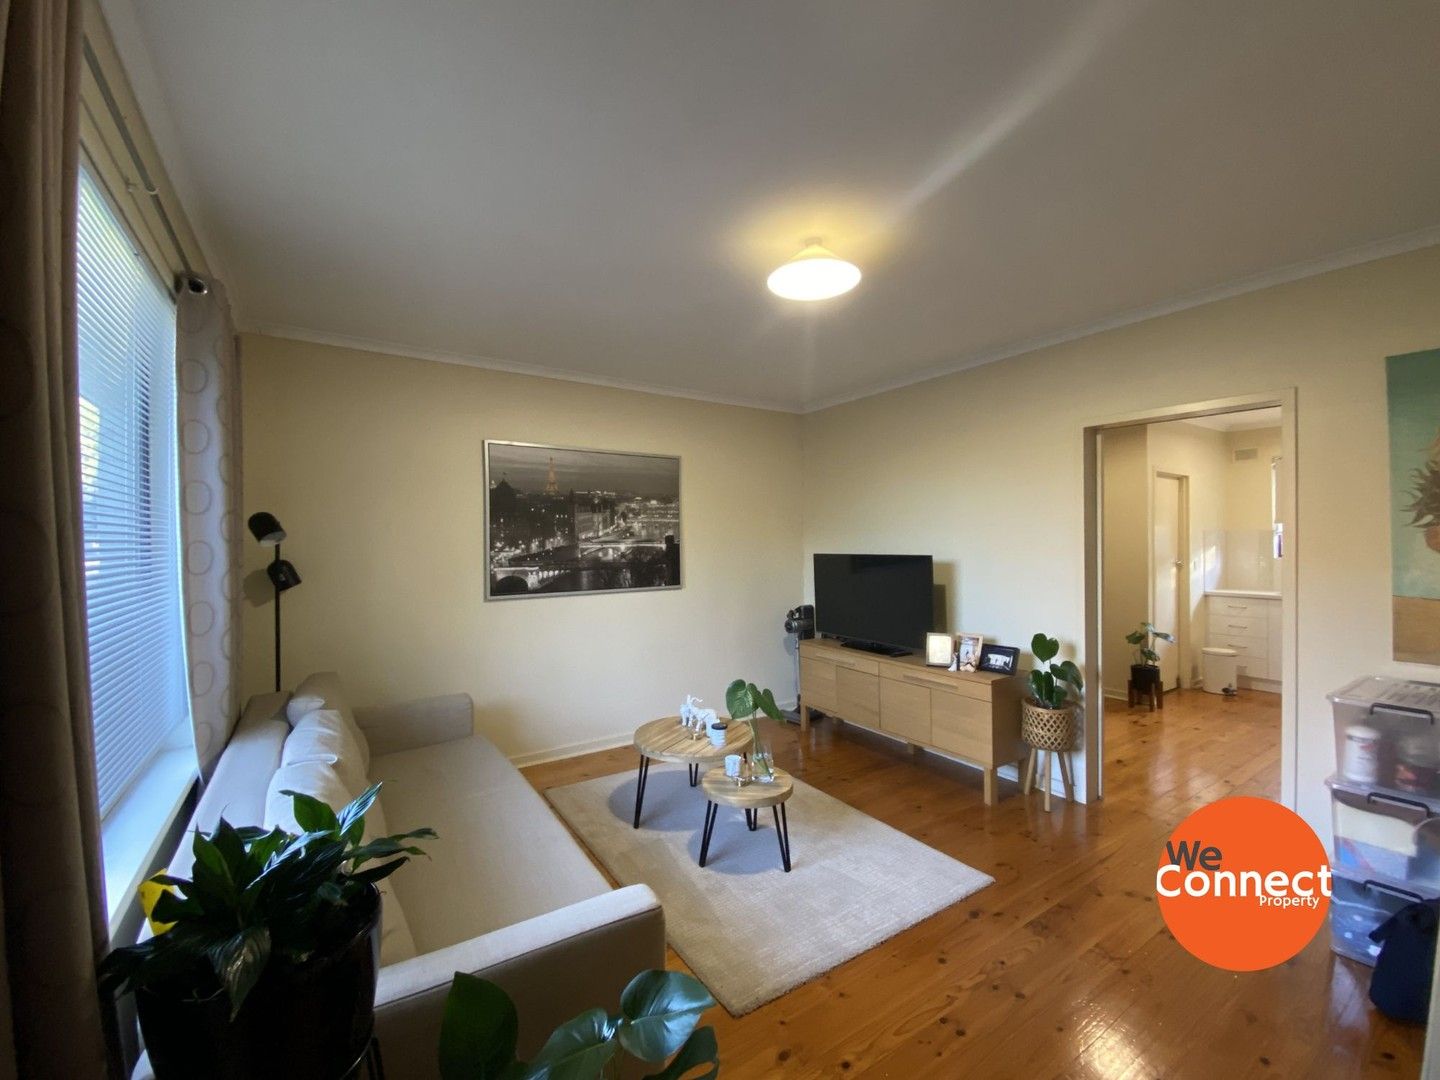 2 bedrooms Apartment / Unit / Flat in 2/49 Glengyle Terrace GLANDORE SA, 5037